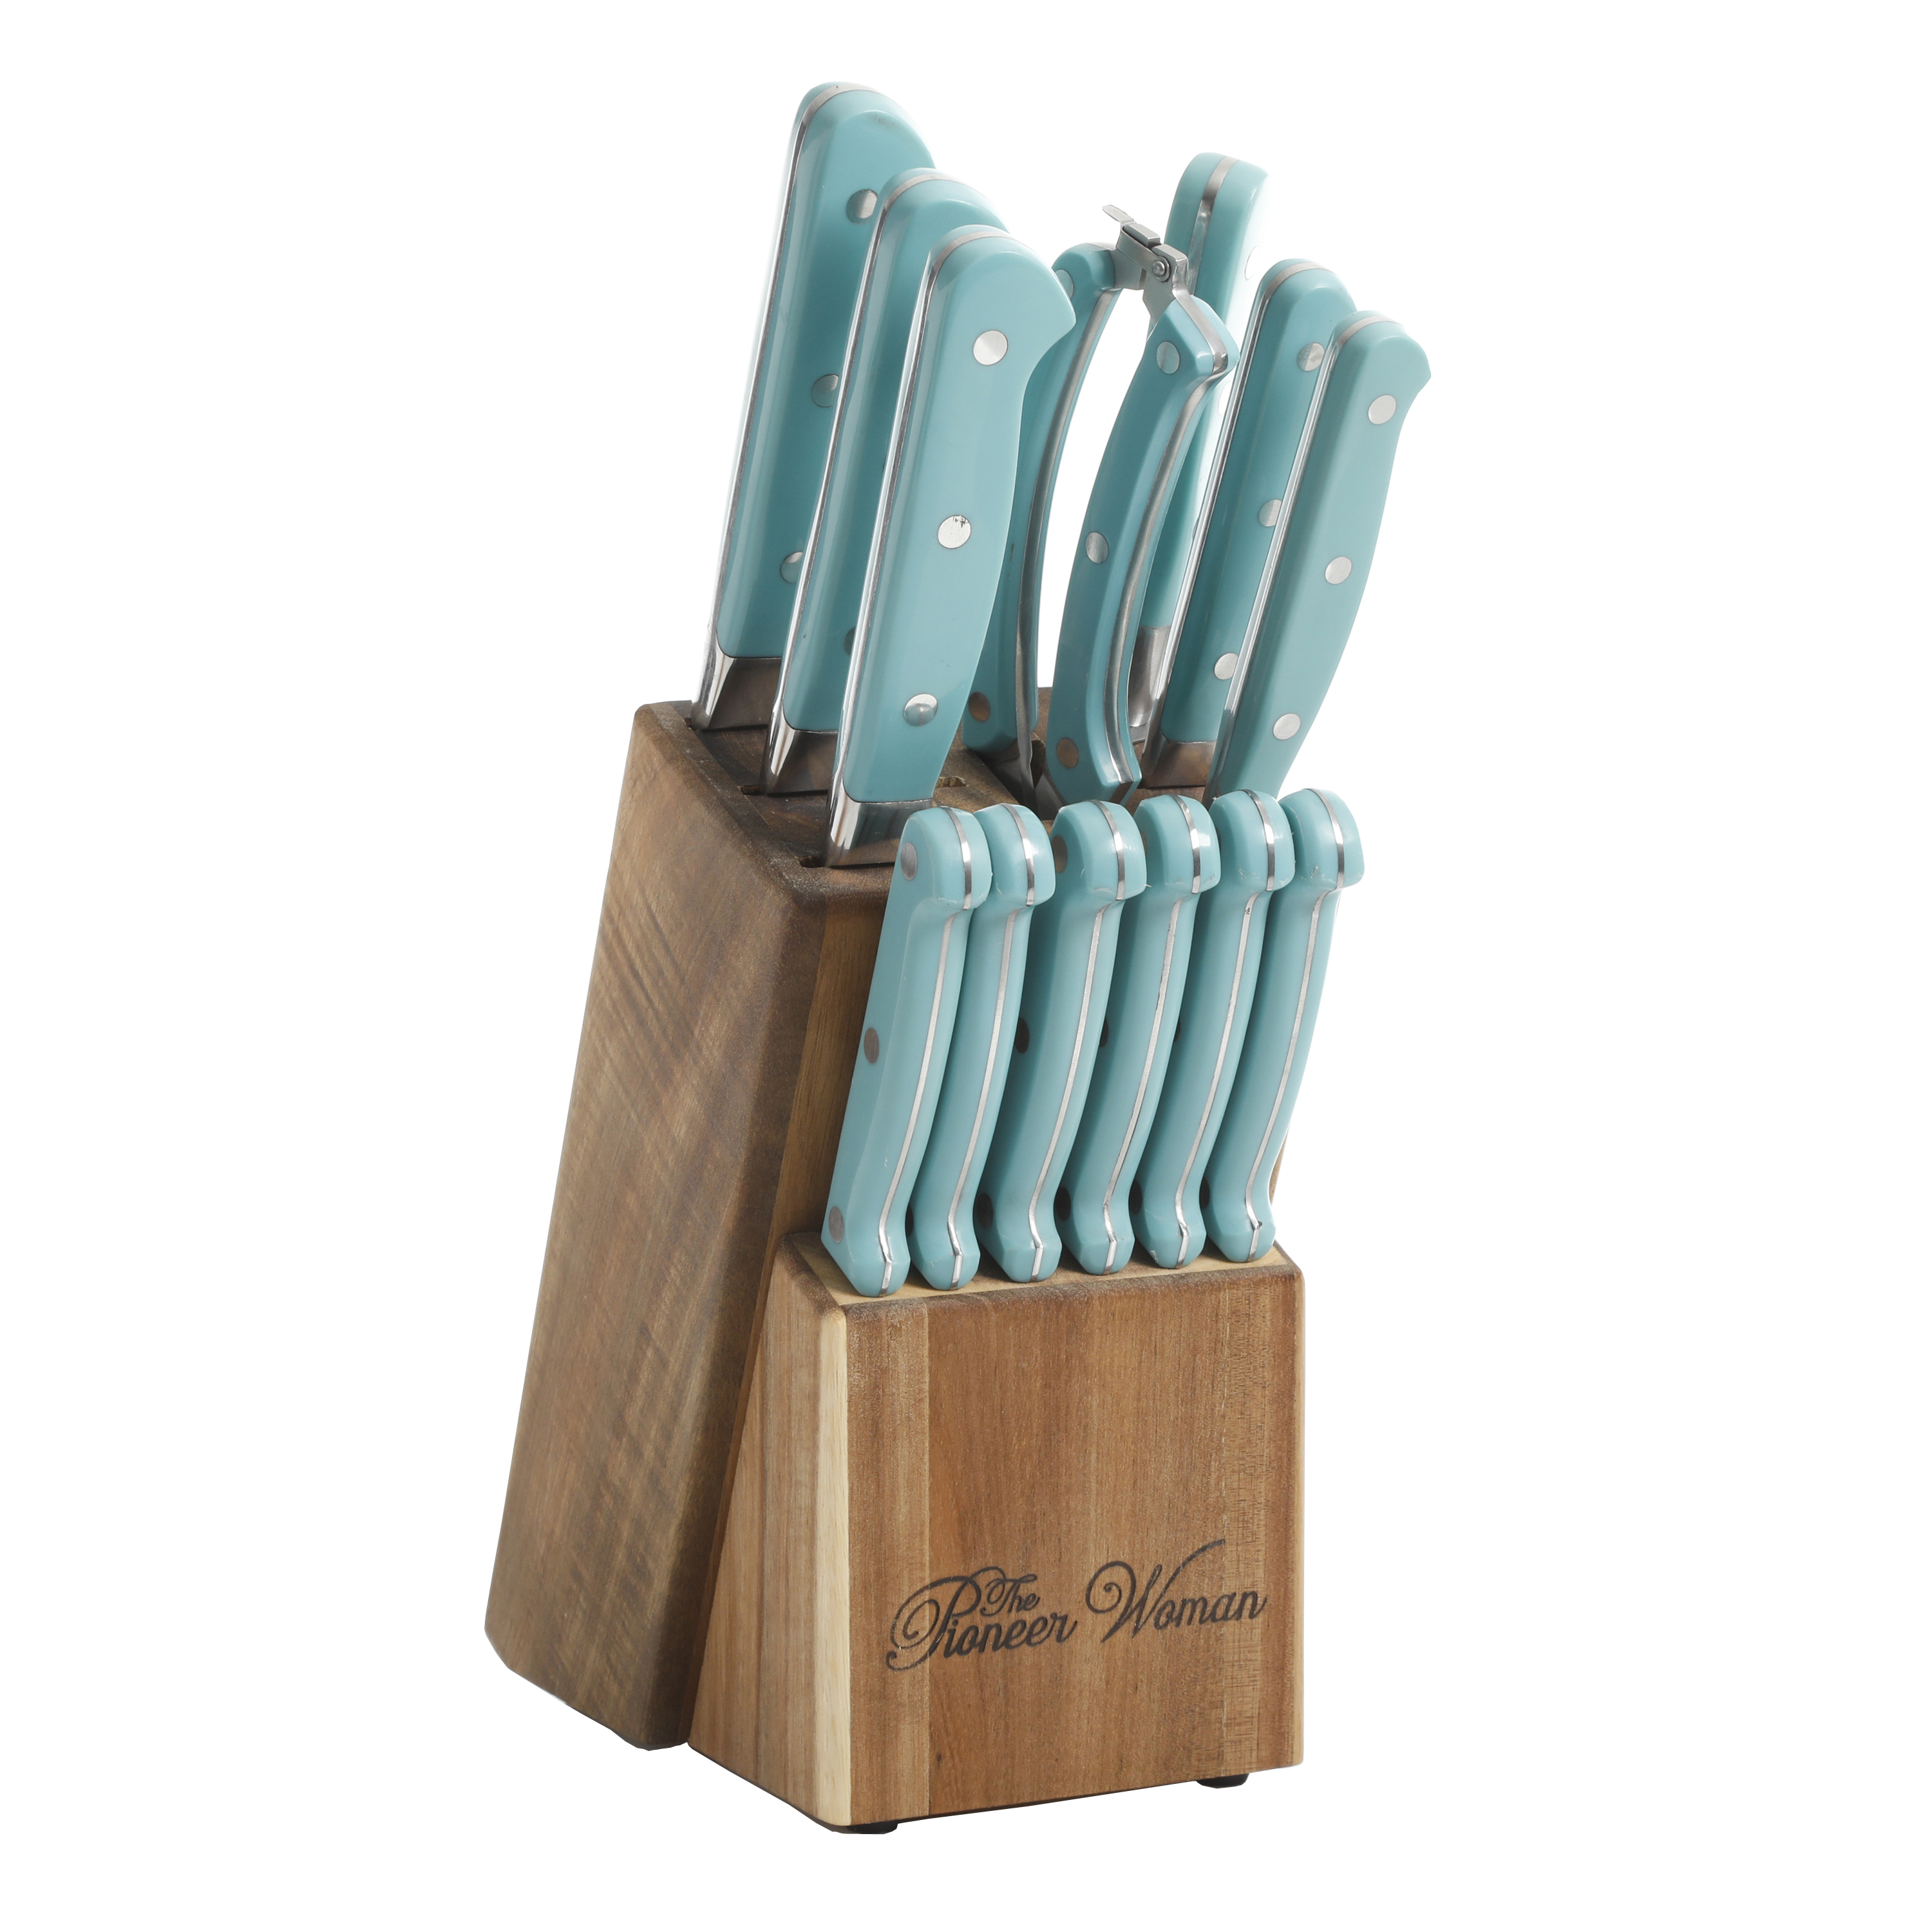 The Pioneer Woman Cowboy Rustic 14-Piece Forged Cutlery Knife Block Set, Turquoise - Walmart.com $35